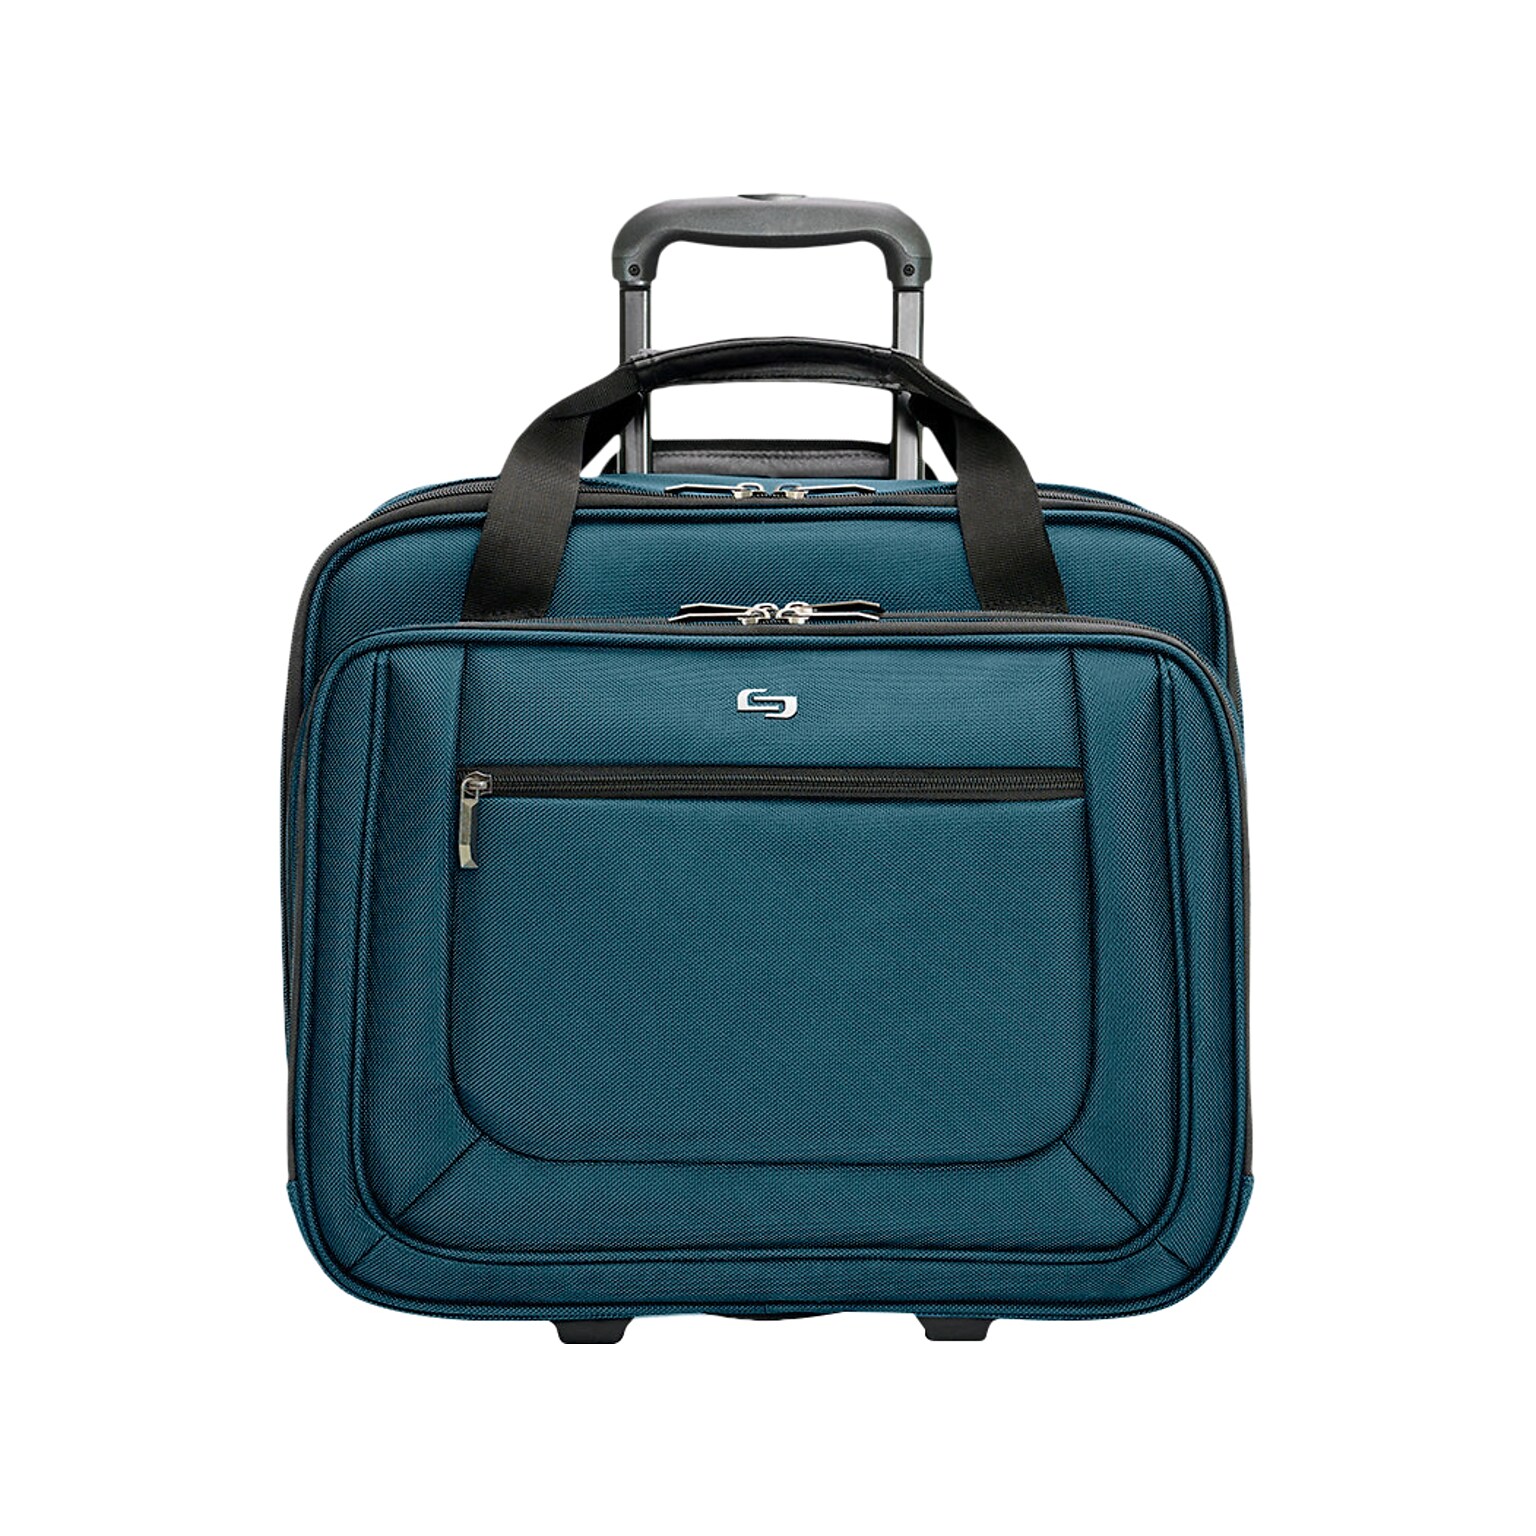 Solo New York Bryant 17.3 Polyester Rolling Laptop Bag, Blue Lagoon (PT138-20)